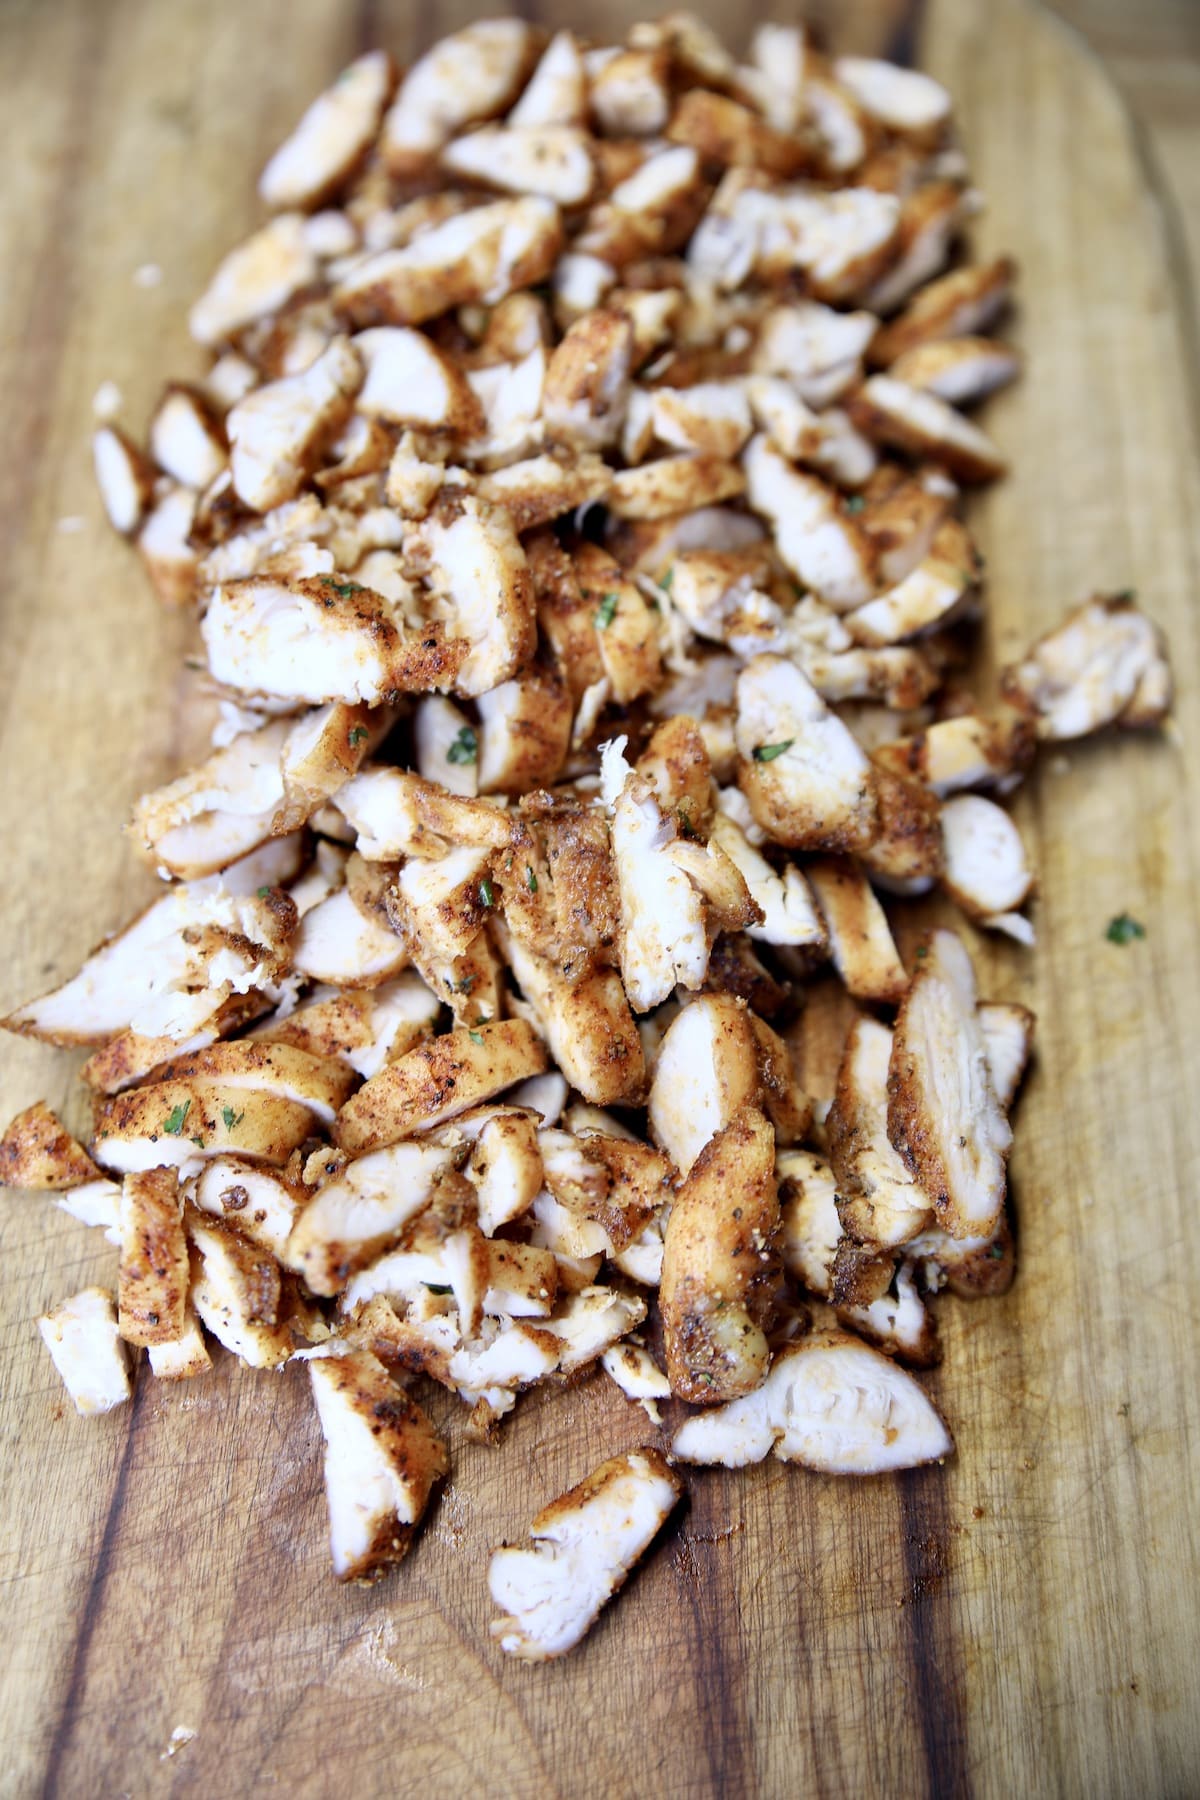 Diced grilled chicken on a cutting board.